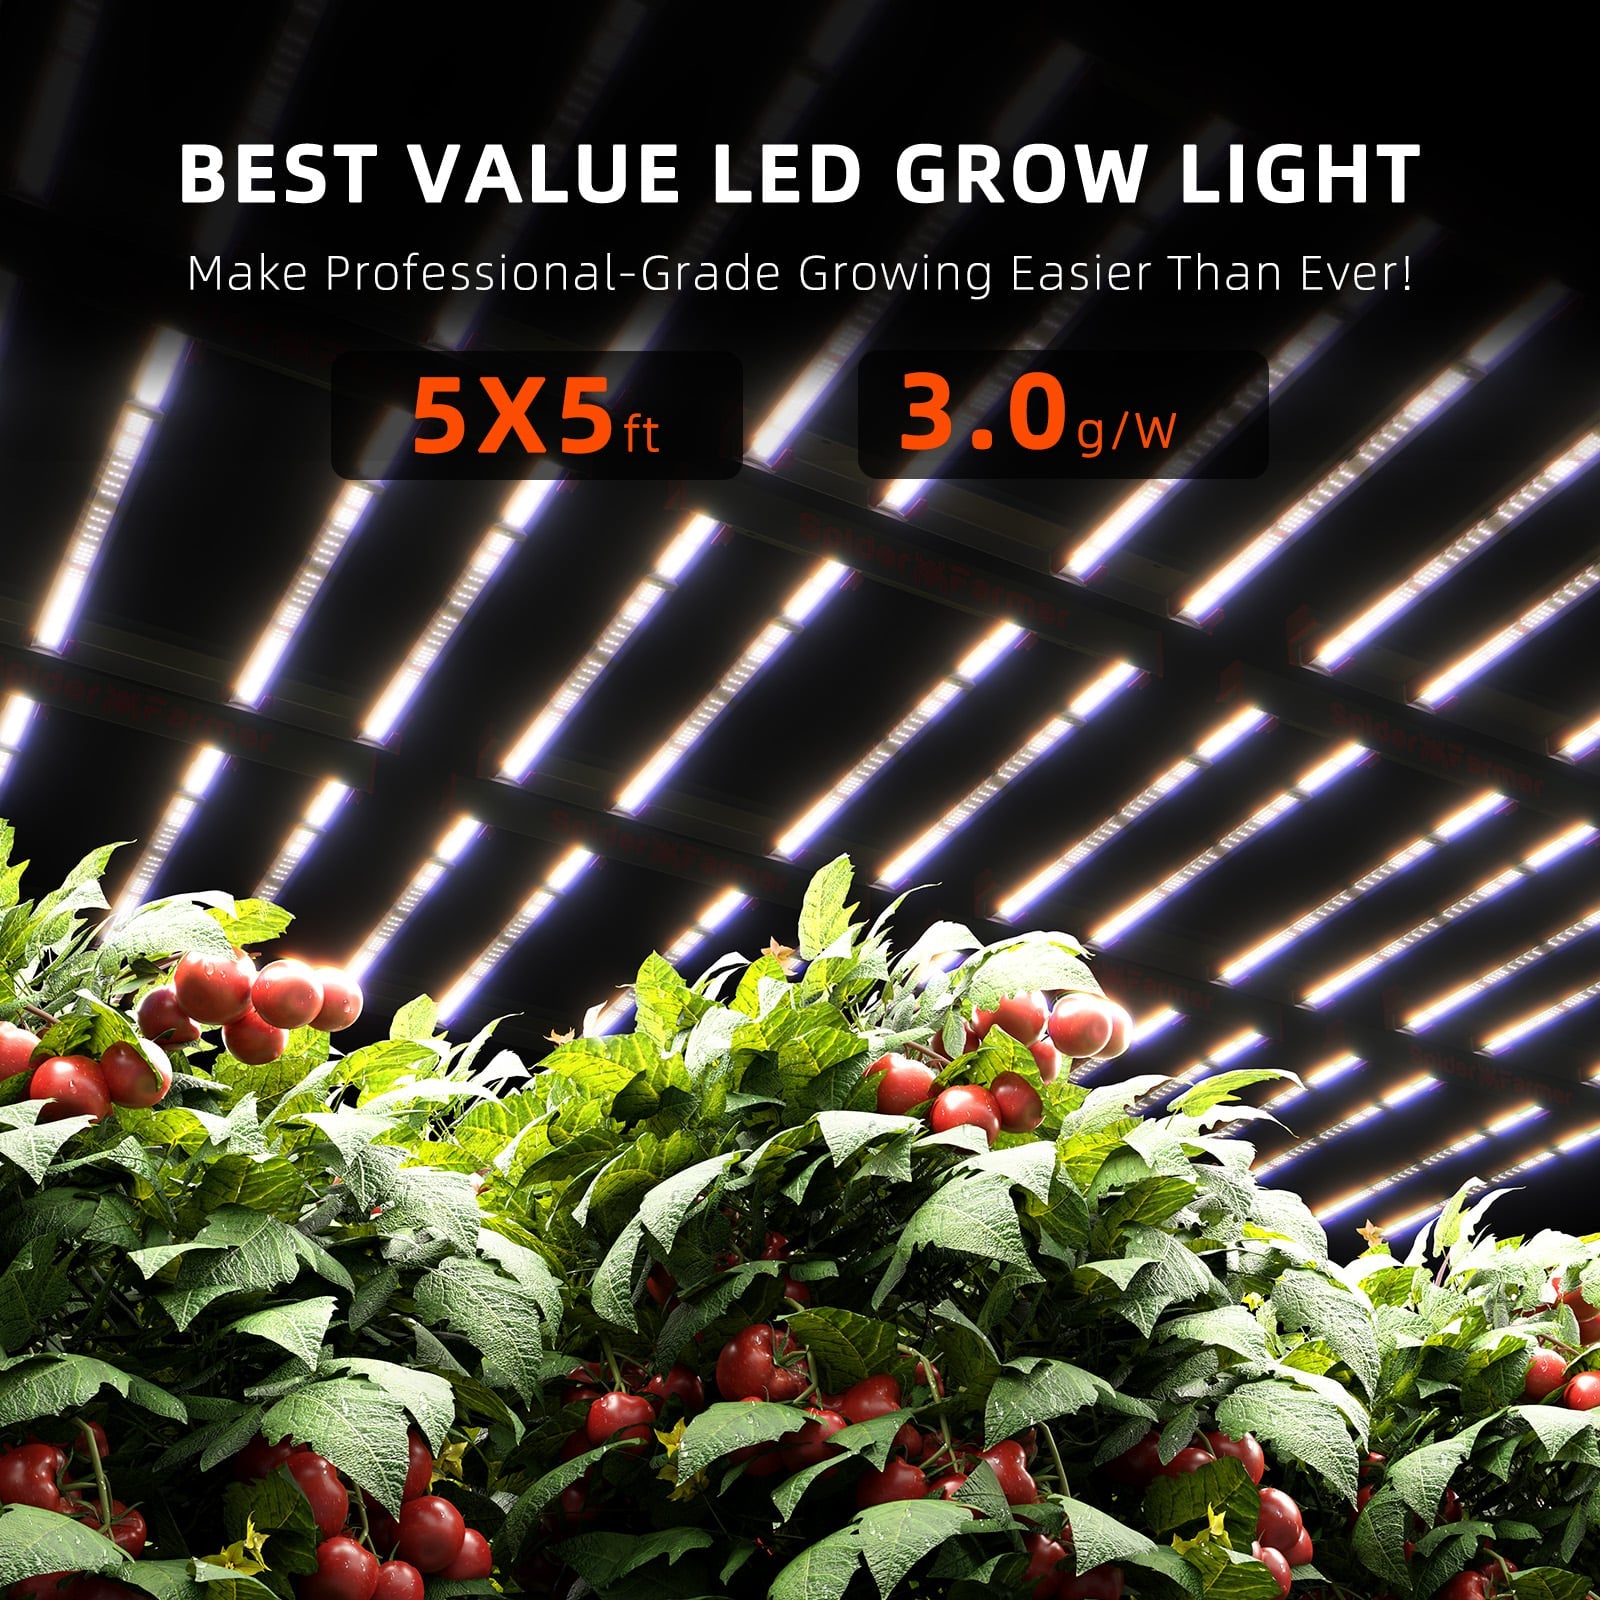 Spider Farmer® G8600 Dimmable Cost-effective Full Spectrum CO2 Commercial LED Grow Light